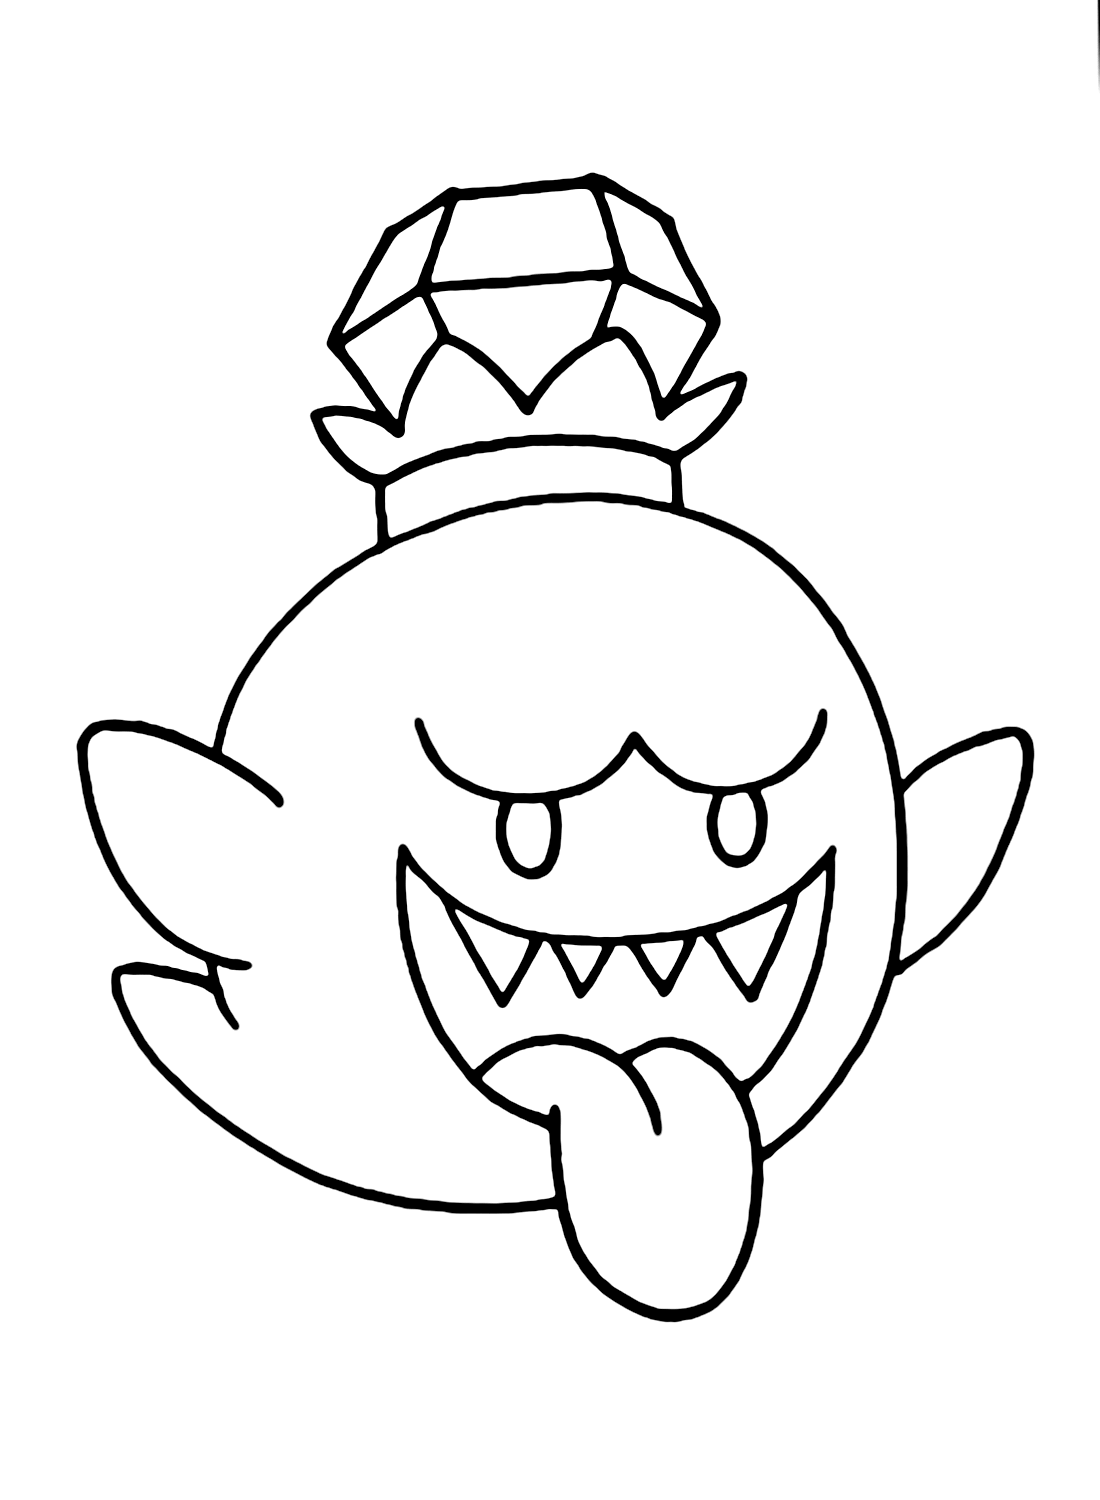 King Boo Images Coloring Pages